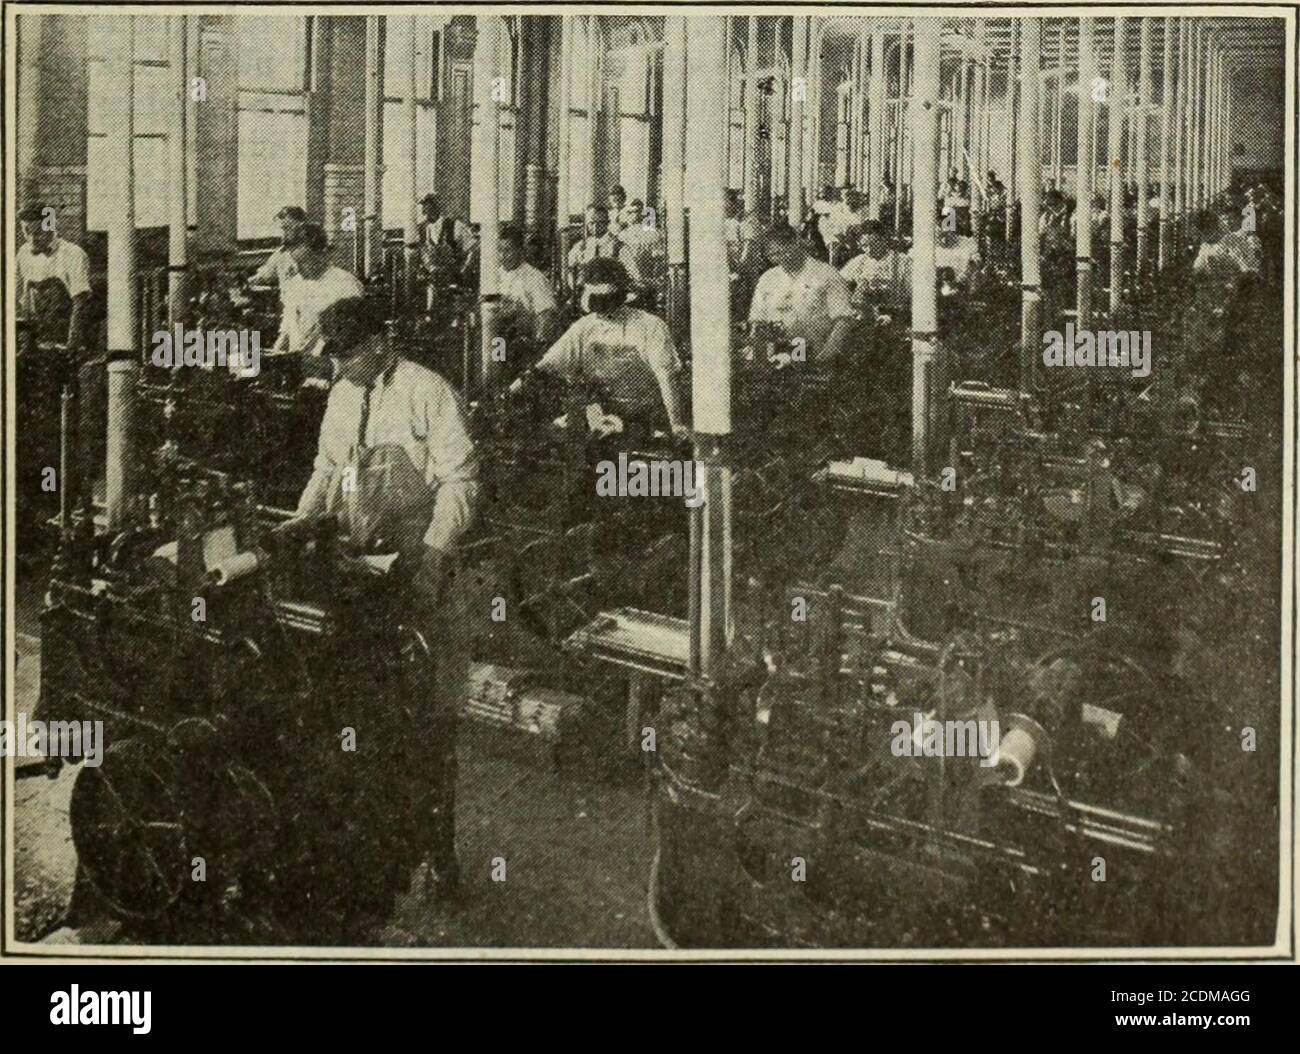 . Review of reviews and world's work . MONOTYPE KEYBOARDS AT THE GOVERNMENT PRINTING OFFICE (By means of which rolls of paper are perforated in the initial process of typesetting) day amounts to twelve and a half tons.. k MONOTYPE CASTING MACHINES (These take the perforated rolls i)roduccd by the machines shown in the other illustration on this page, and cast type from them) So much for the plant. The figures of outputare equally amazing. For ex-ample, 1,800,000 type pagesare set in a year, and thisnumber of type pages is saidto be greater than the annualoutput of all the book-pub-lishing hous Stock Photo